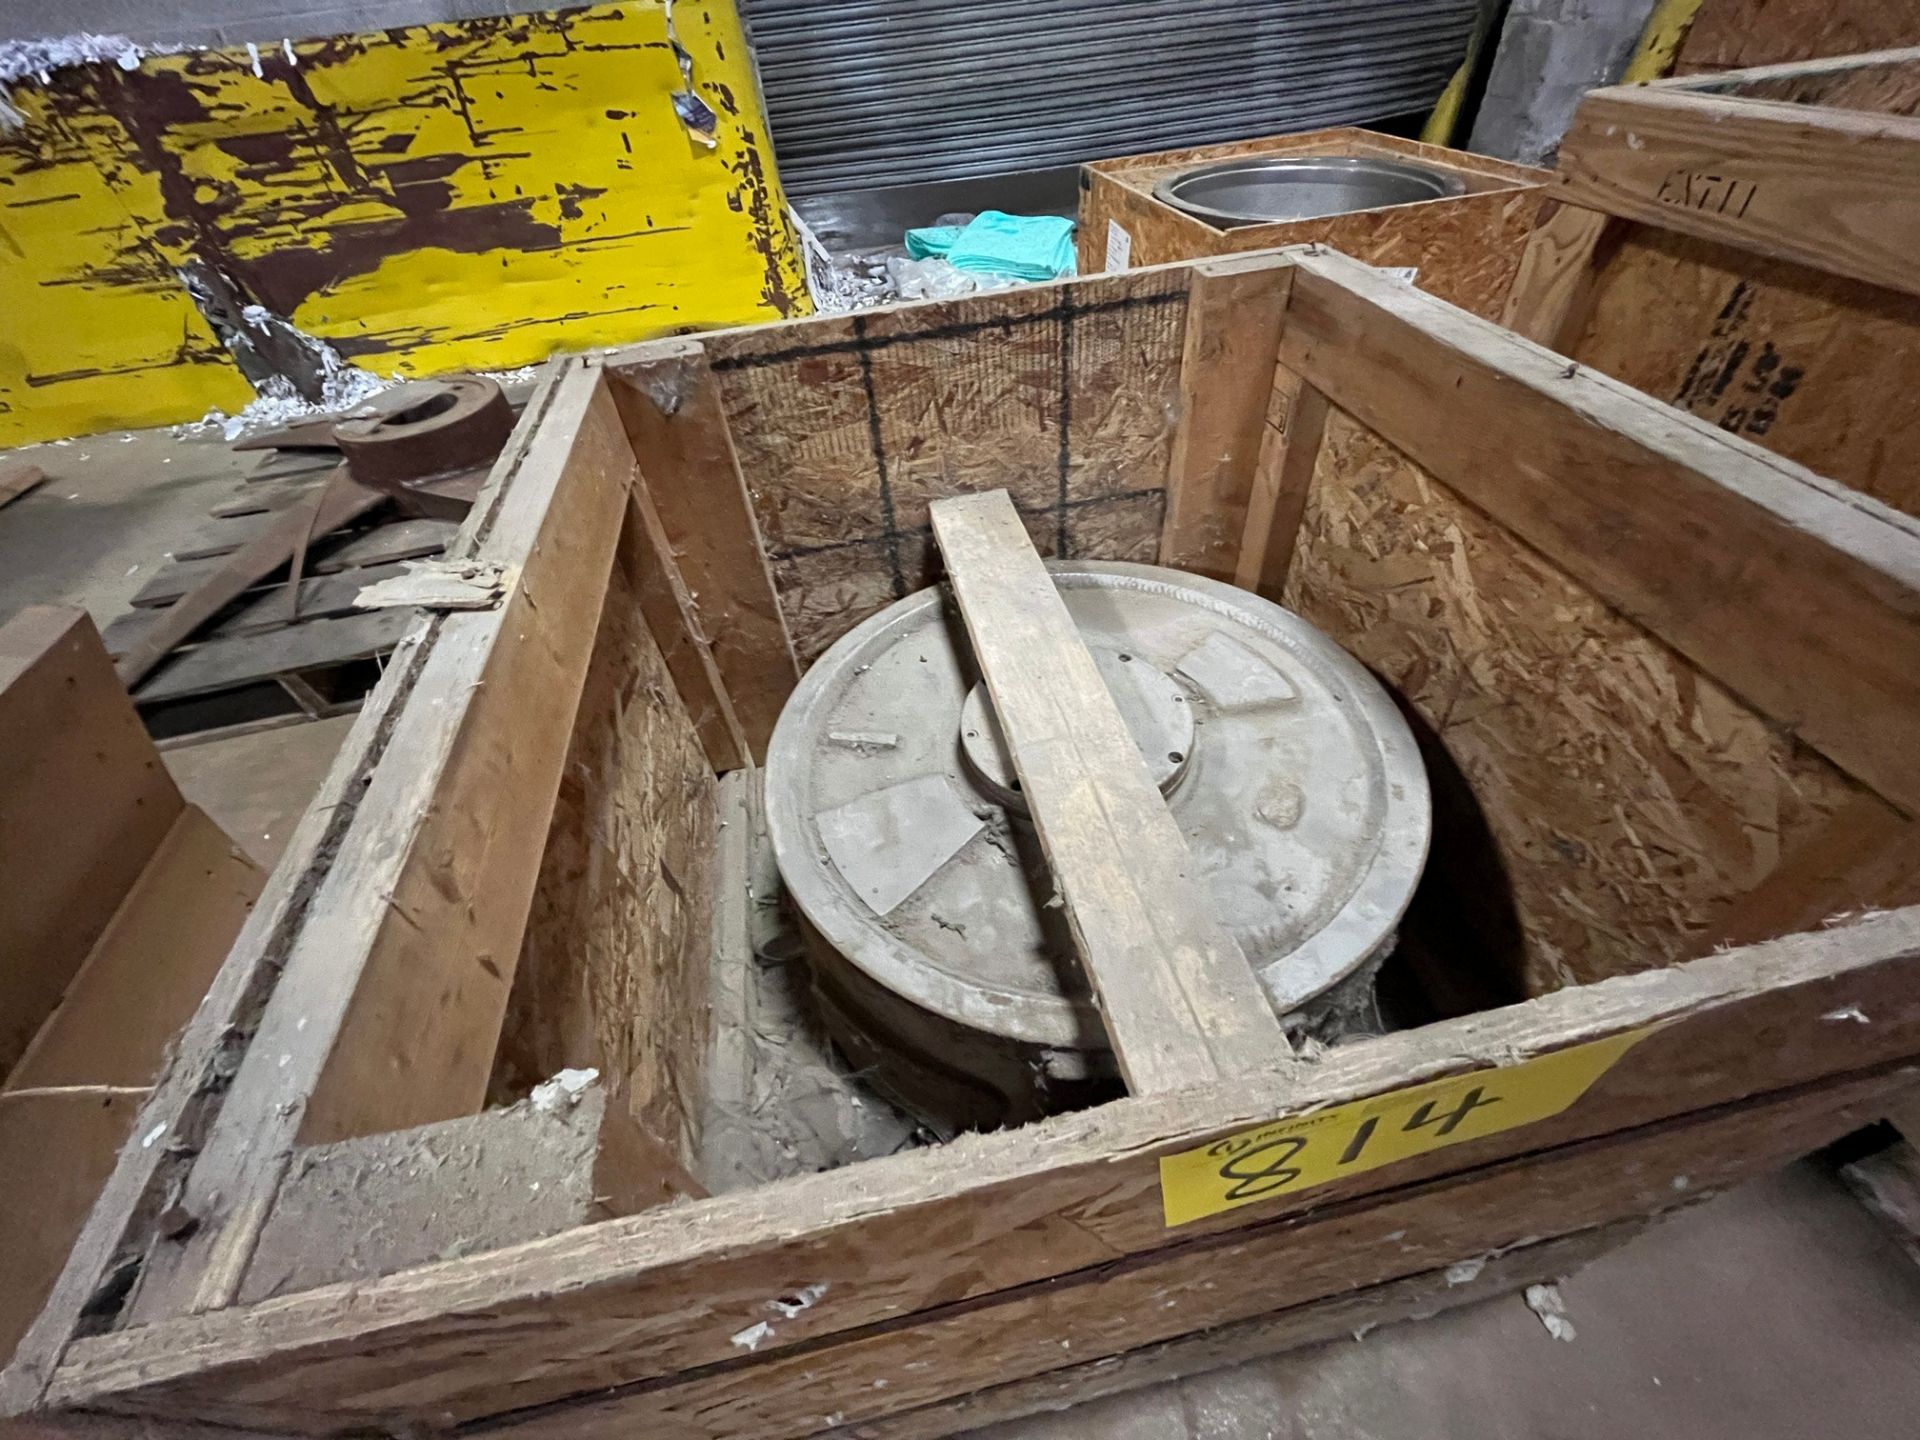 ROTARY ATTACHMENT IN CRATE, 10" D X 22" DIA. (DEINKING BUILDING)